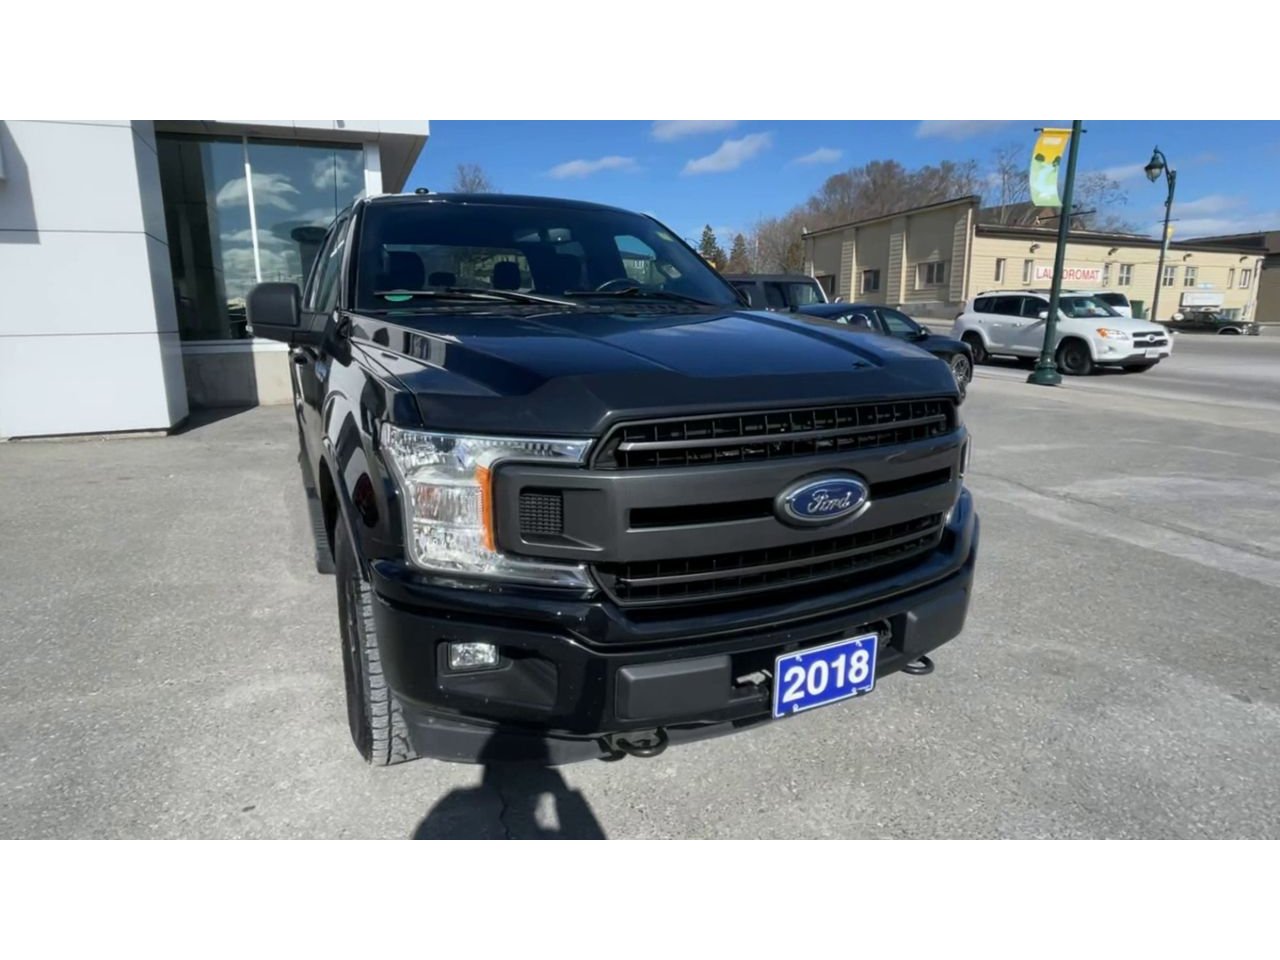 2018 Ford F-150 - 21646A Full Image 3